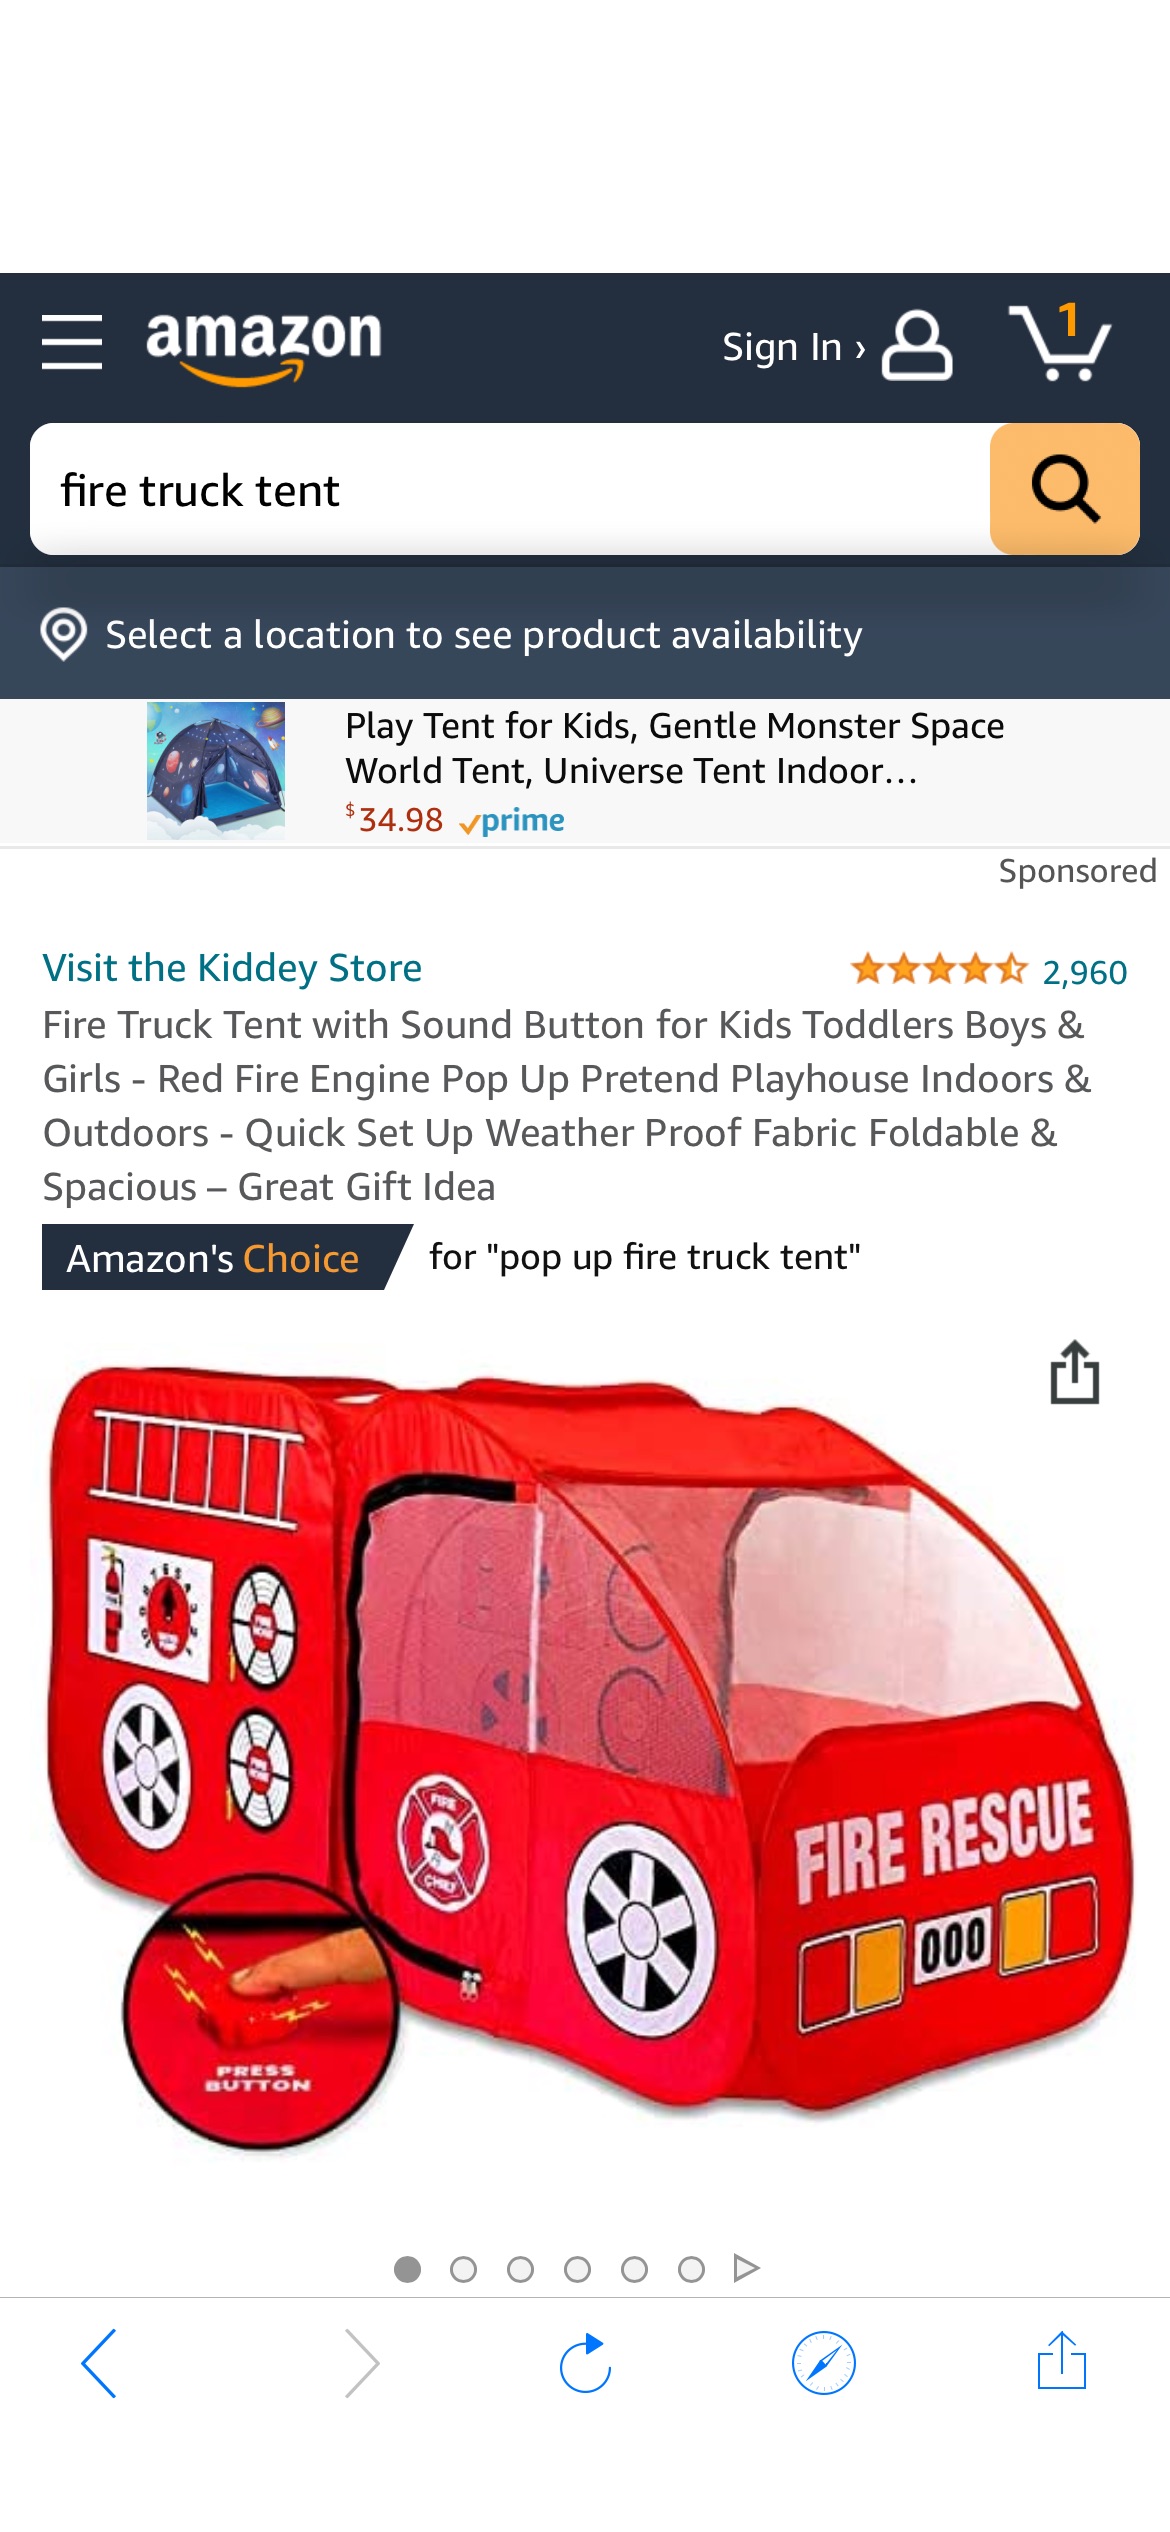 Amazon.com: Fire Truck Tent with Sound Button for Kids Toddlers Boys & Girls - Red Fire Engine Pop Up Pretend Playhouse Indoors & Outdoors 消防车造型帐篷